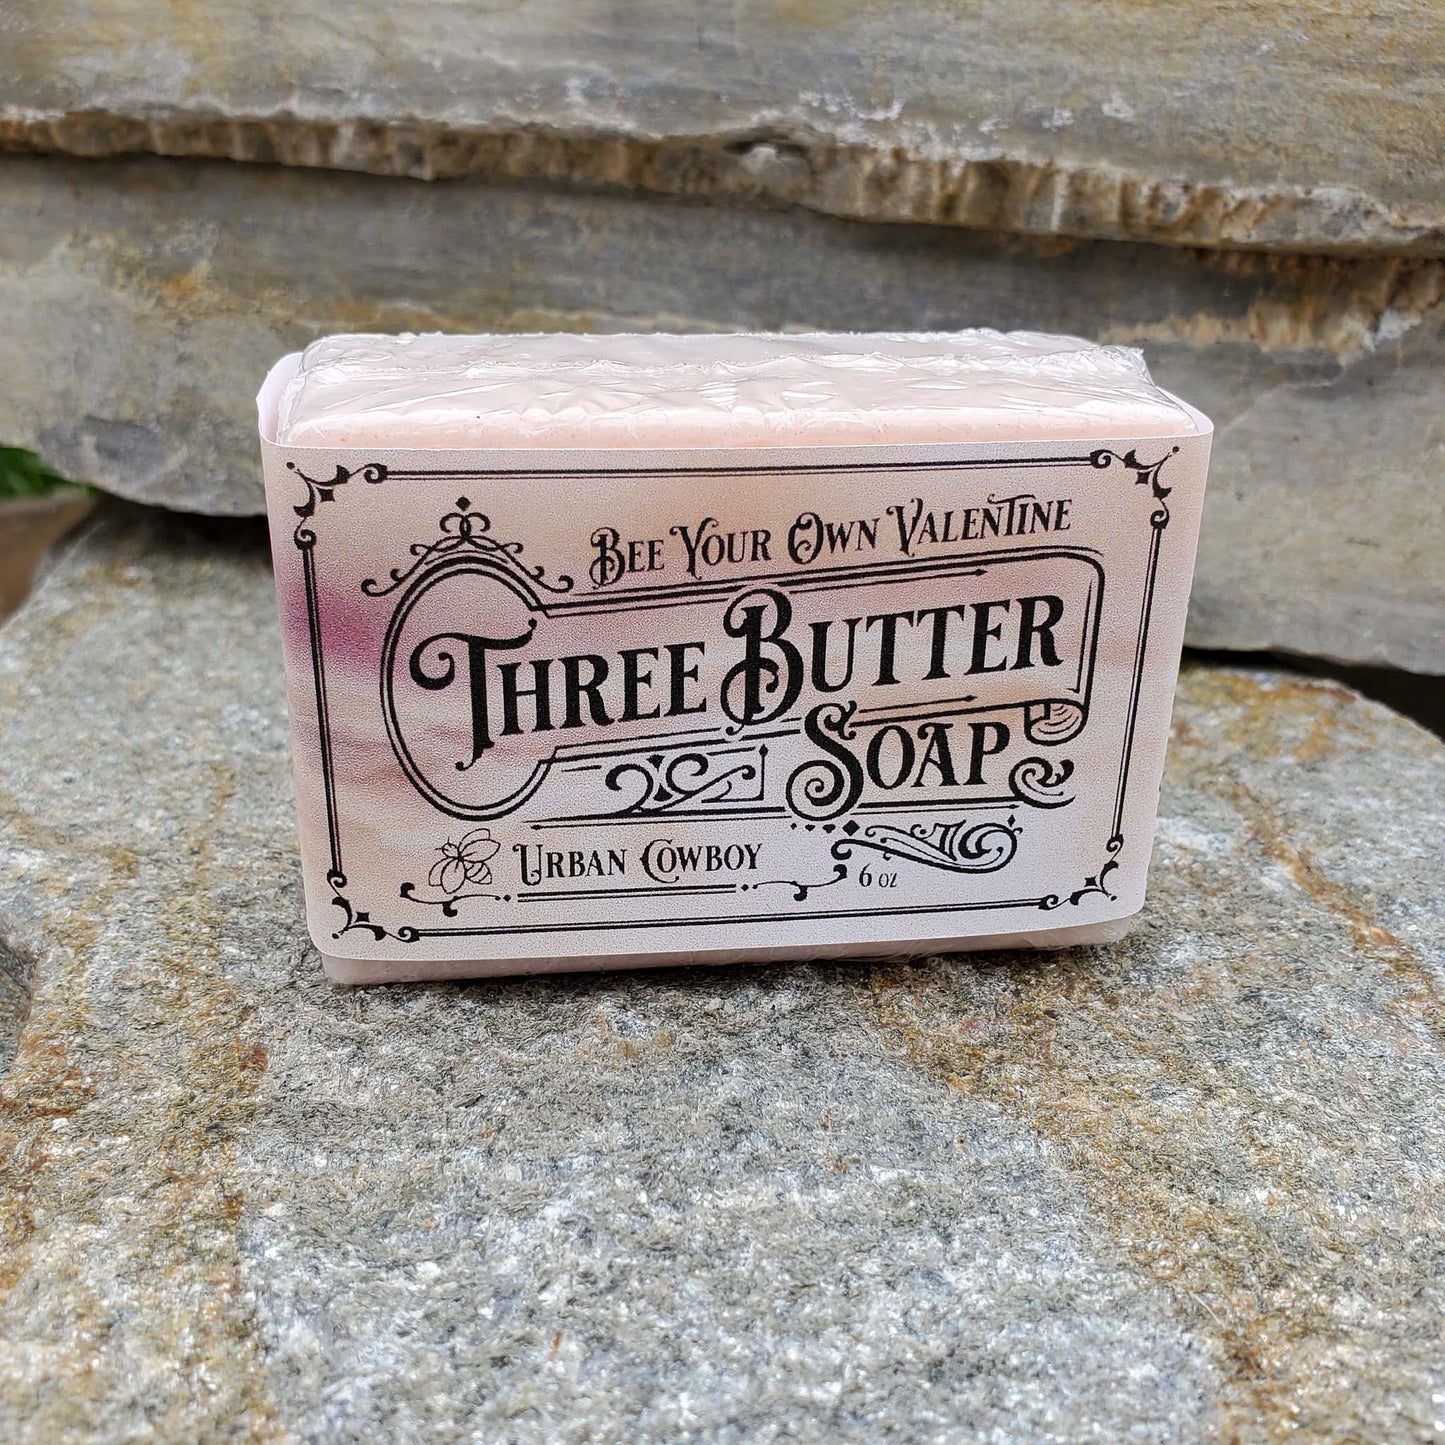 Bee Your Own Valentine Three Butter Soap Urban Cowboy